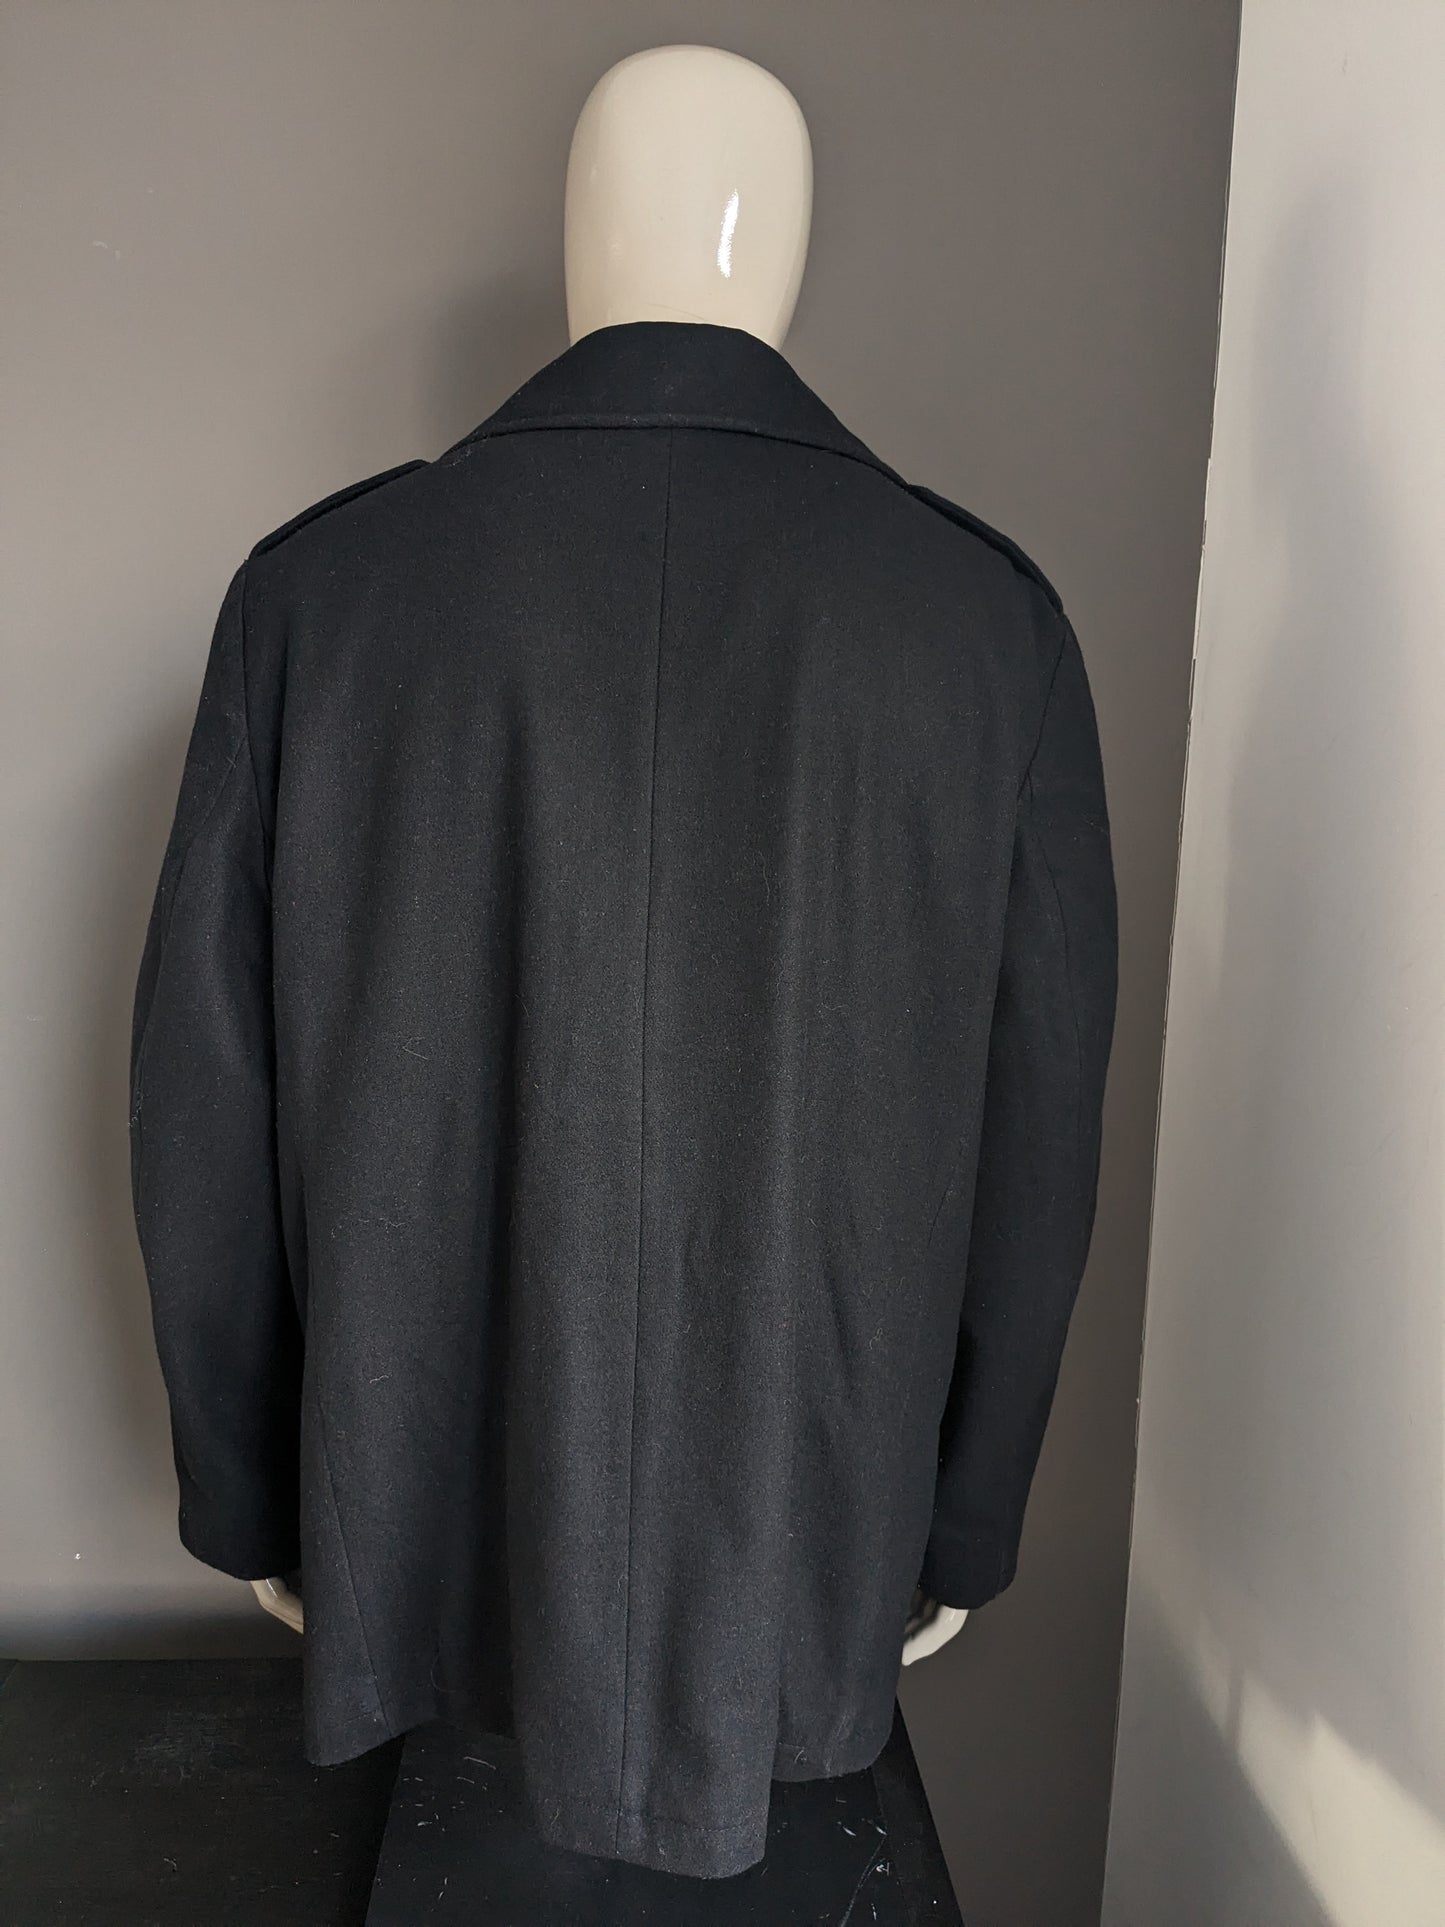 Nautica woolen jacket with larger buttons. Black colored. Size 2XL / XXL.